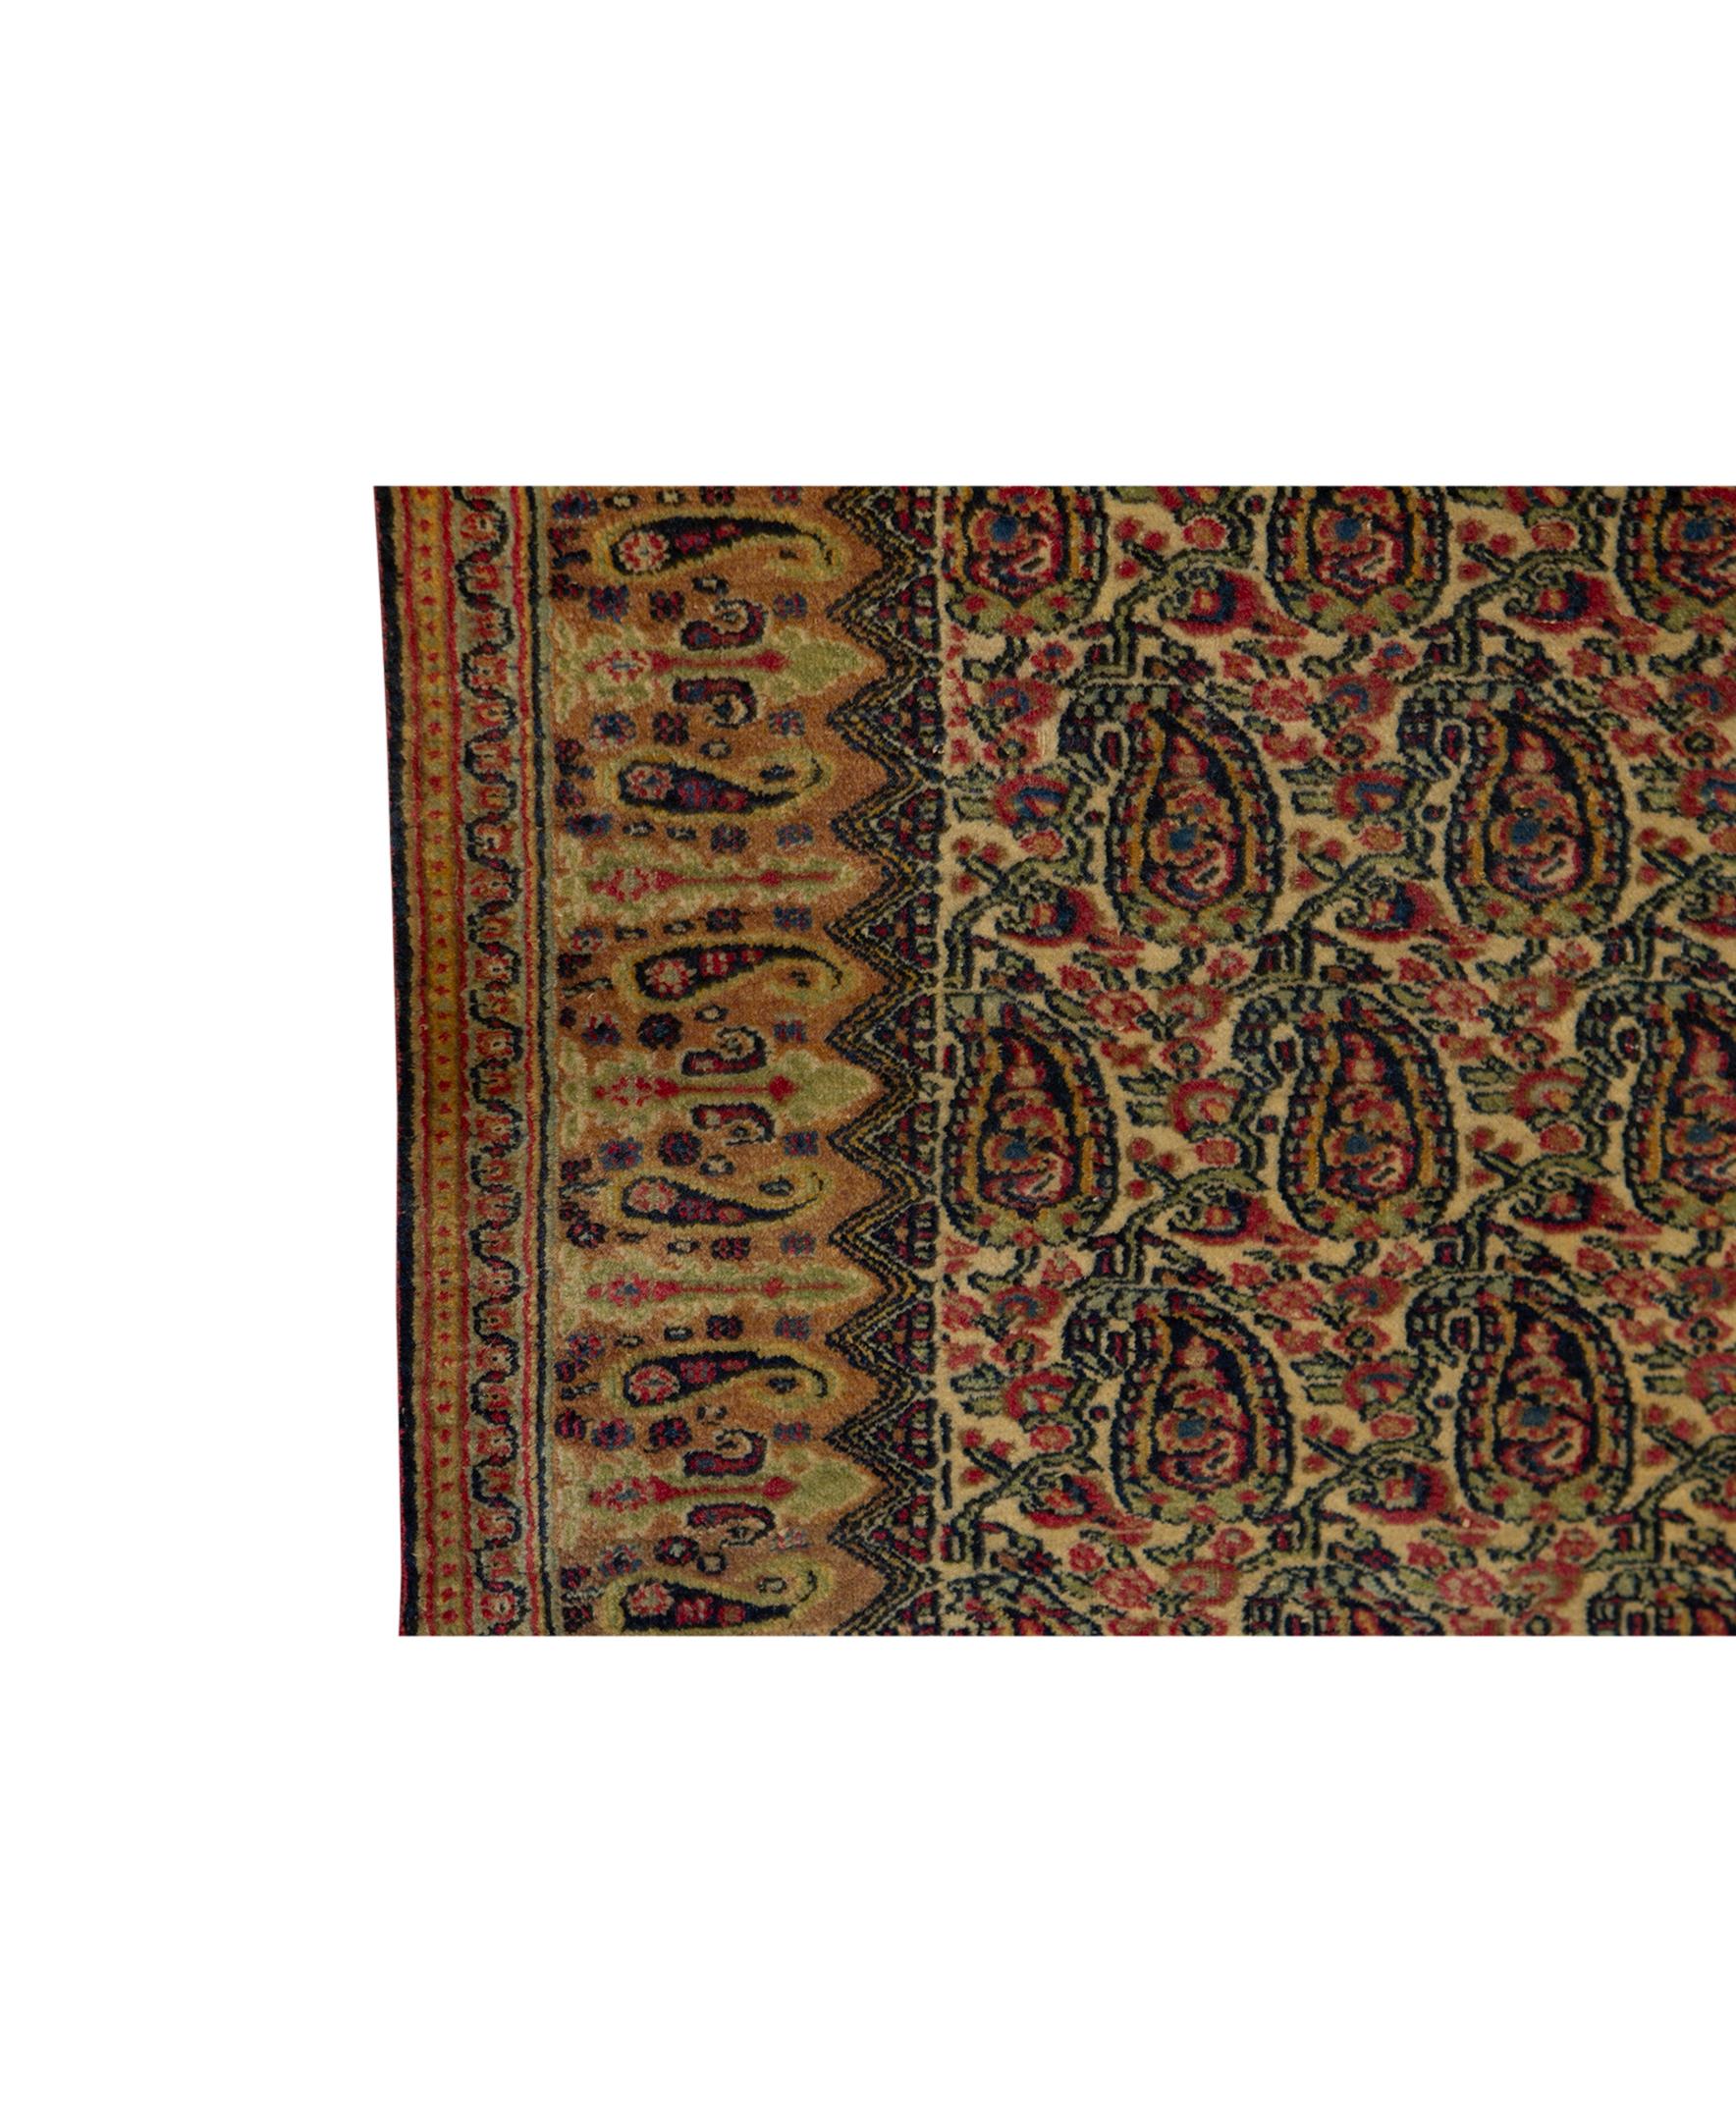   Antique Persian Fine Traditional Handwoven Luxury Wool Multi Rug. Size: 5'-10